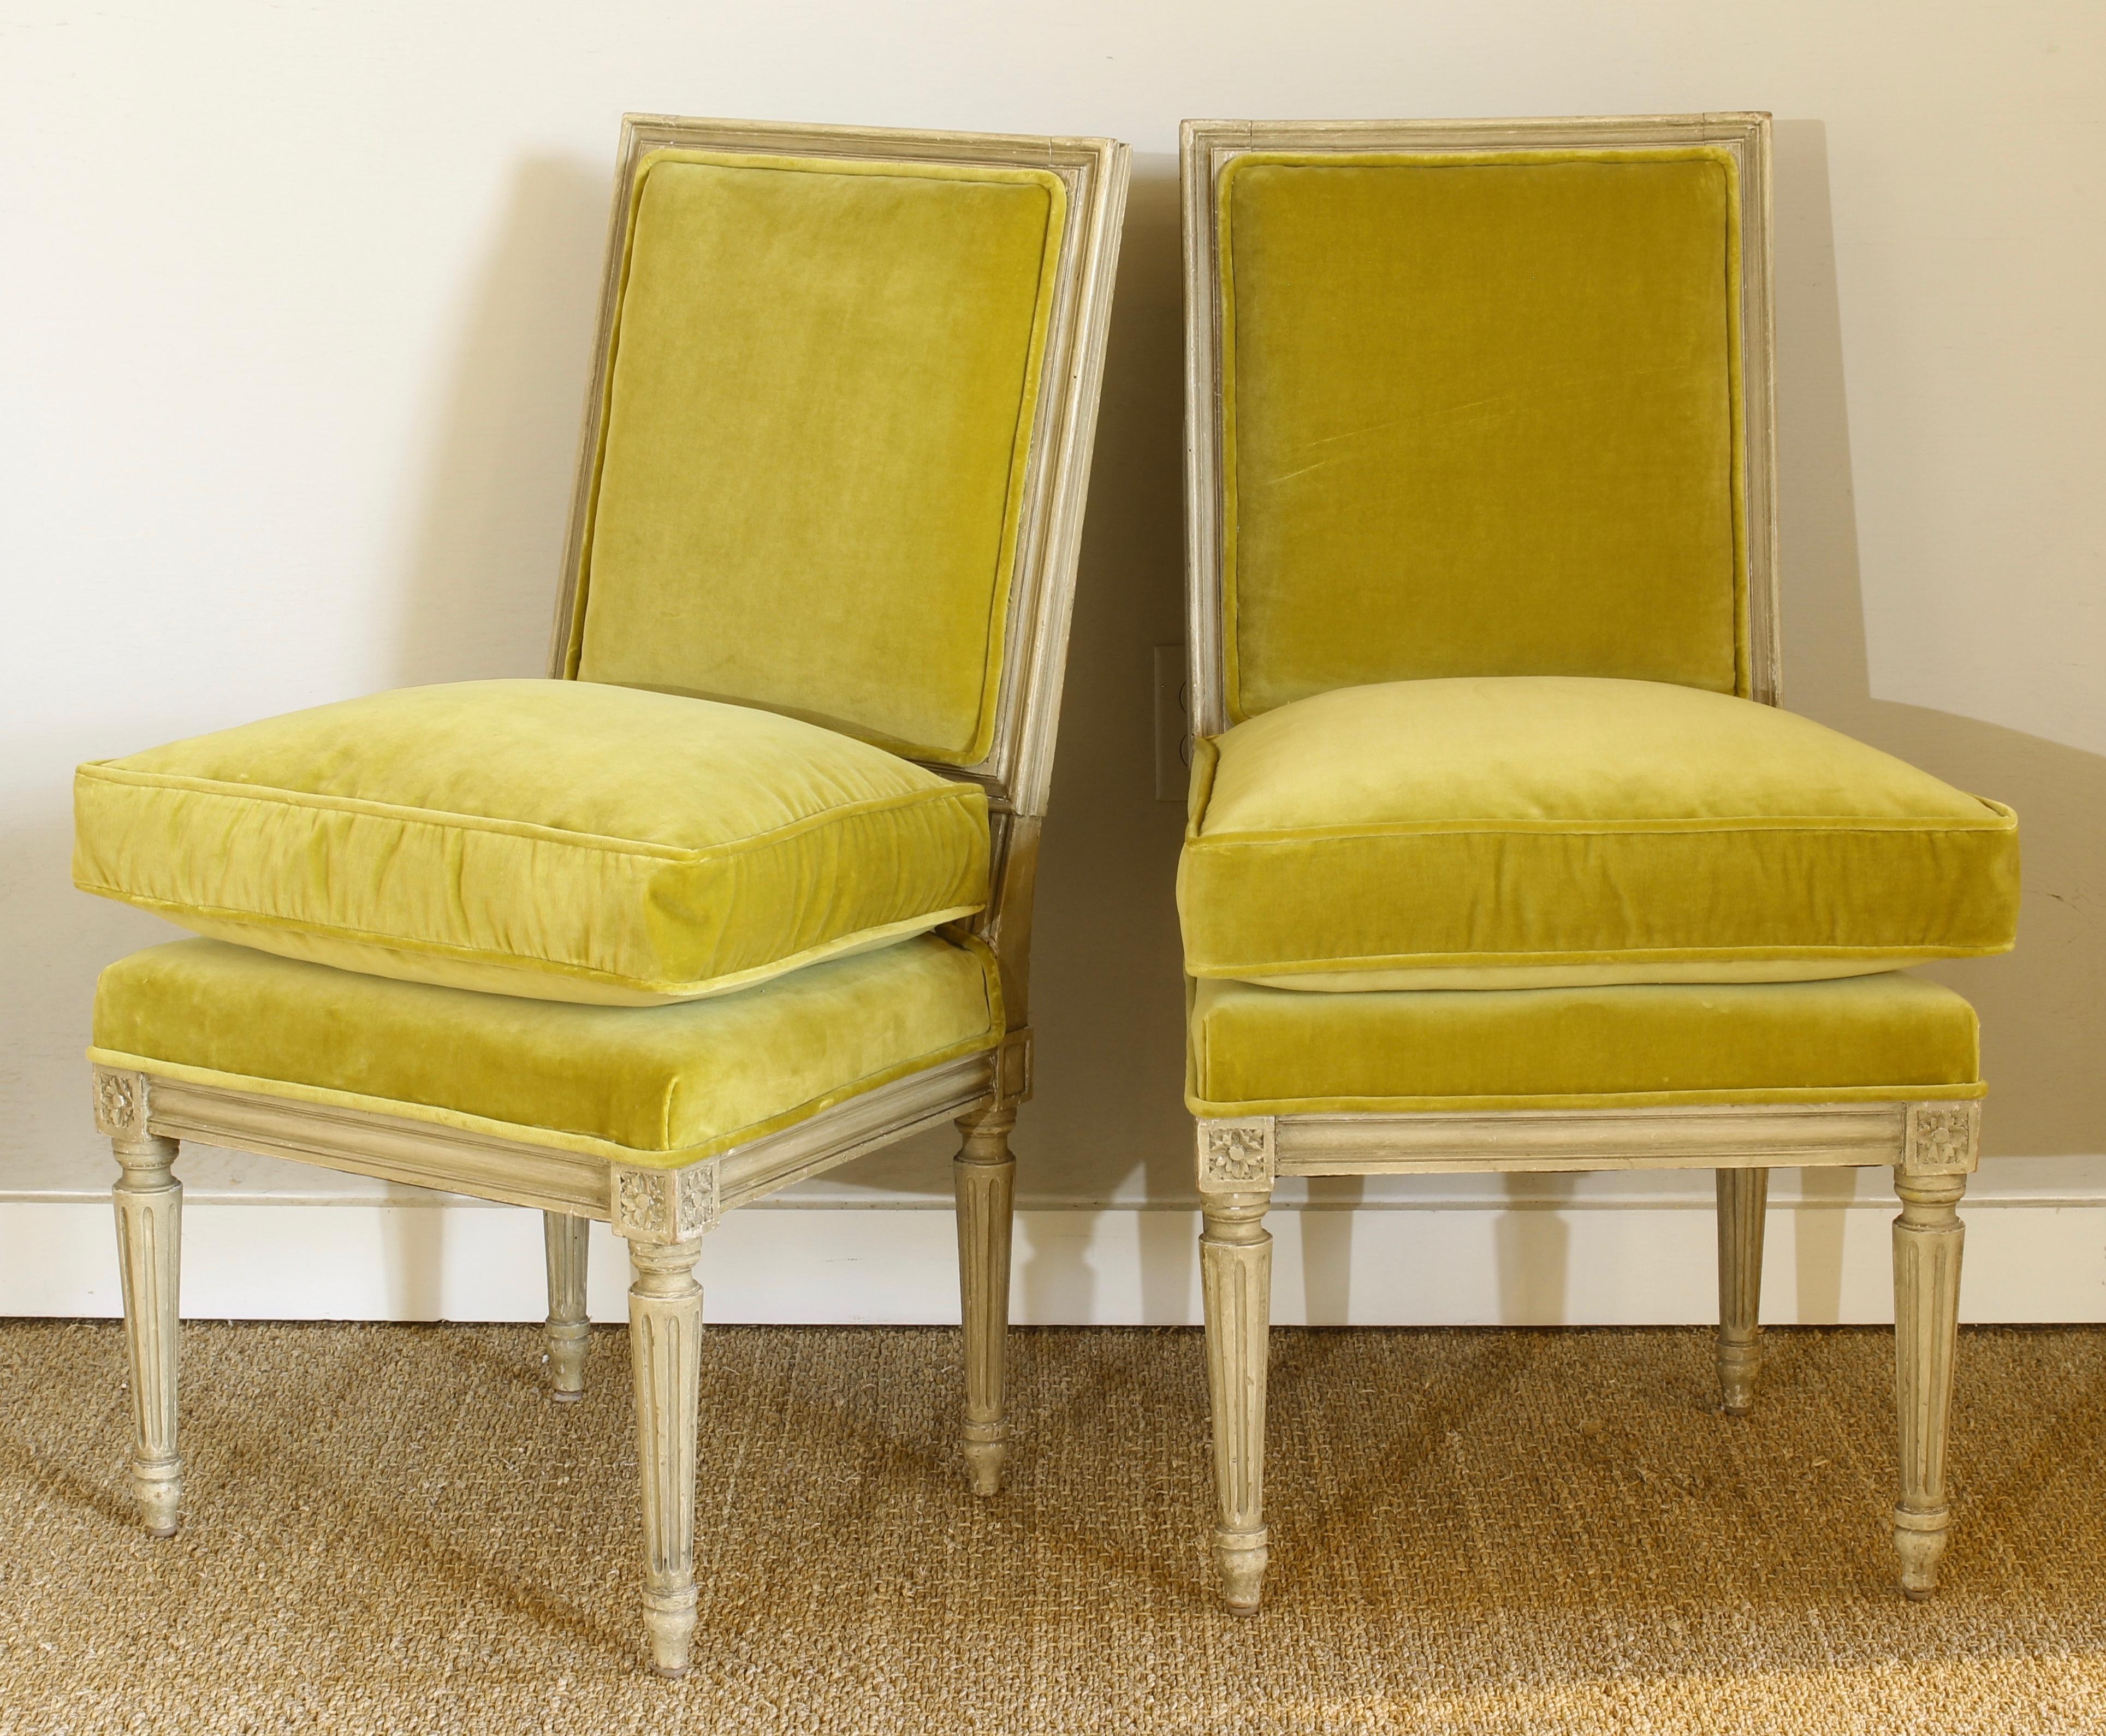 A lovely pair of small late 19th century. Louis XVI style painted slipper chairs recently upholstered in a lustrous chartreuse green velvet.